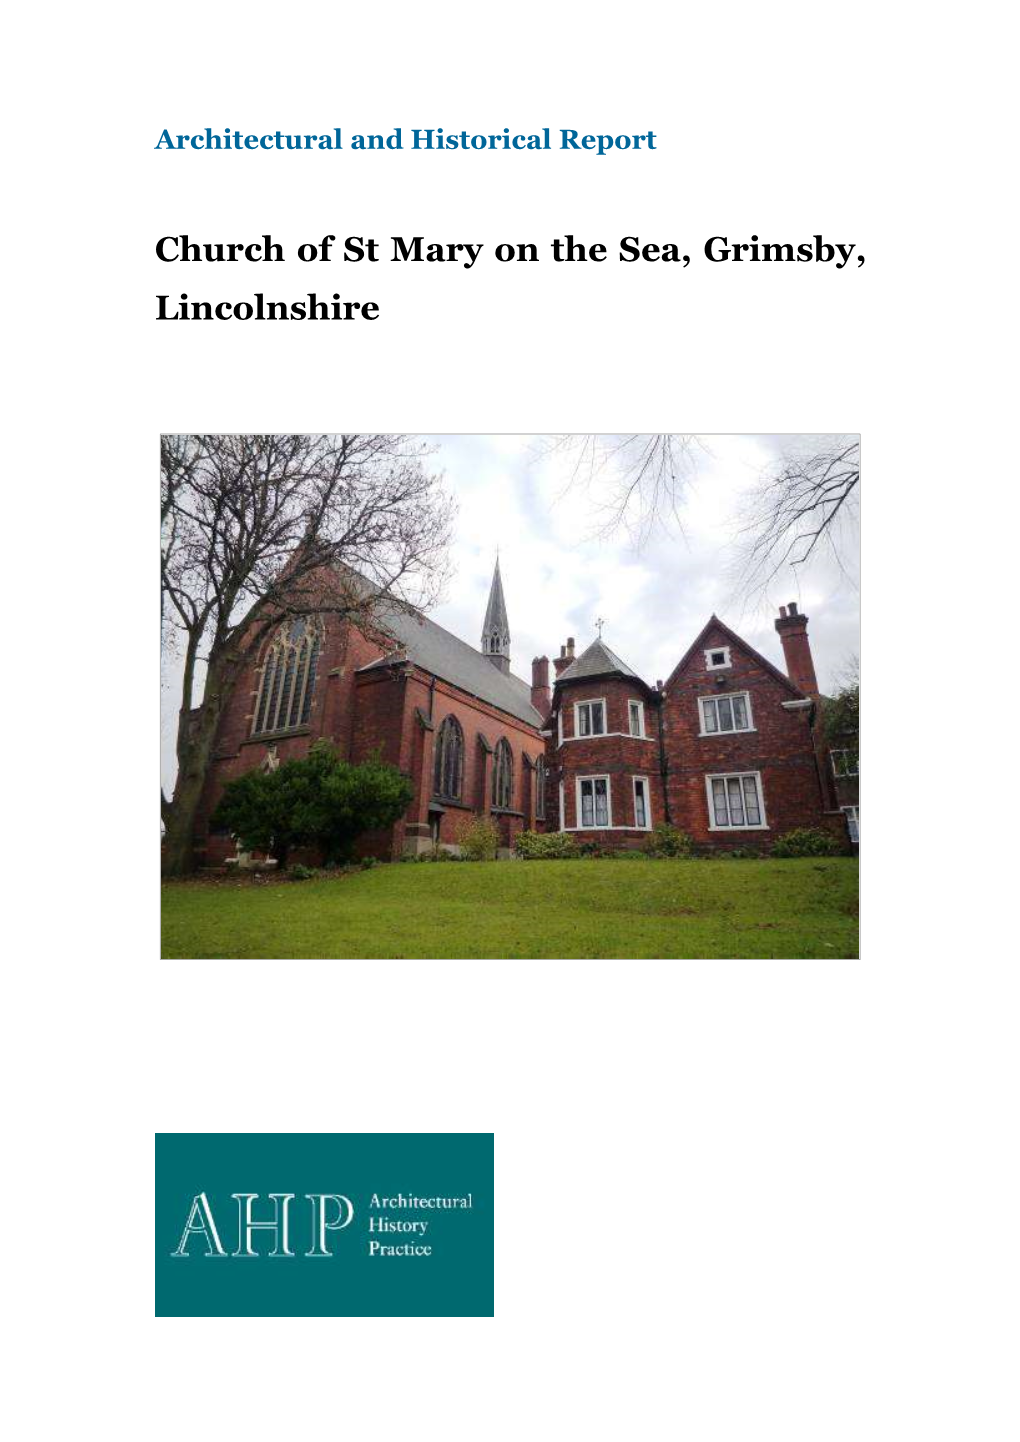 Church of St Mary on the Sea, Grimsby, Lincolnshire